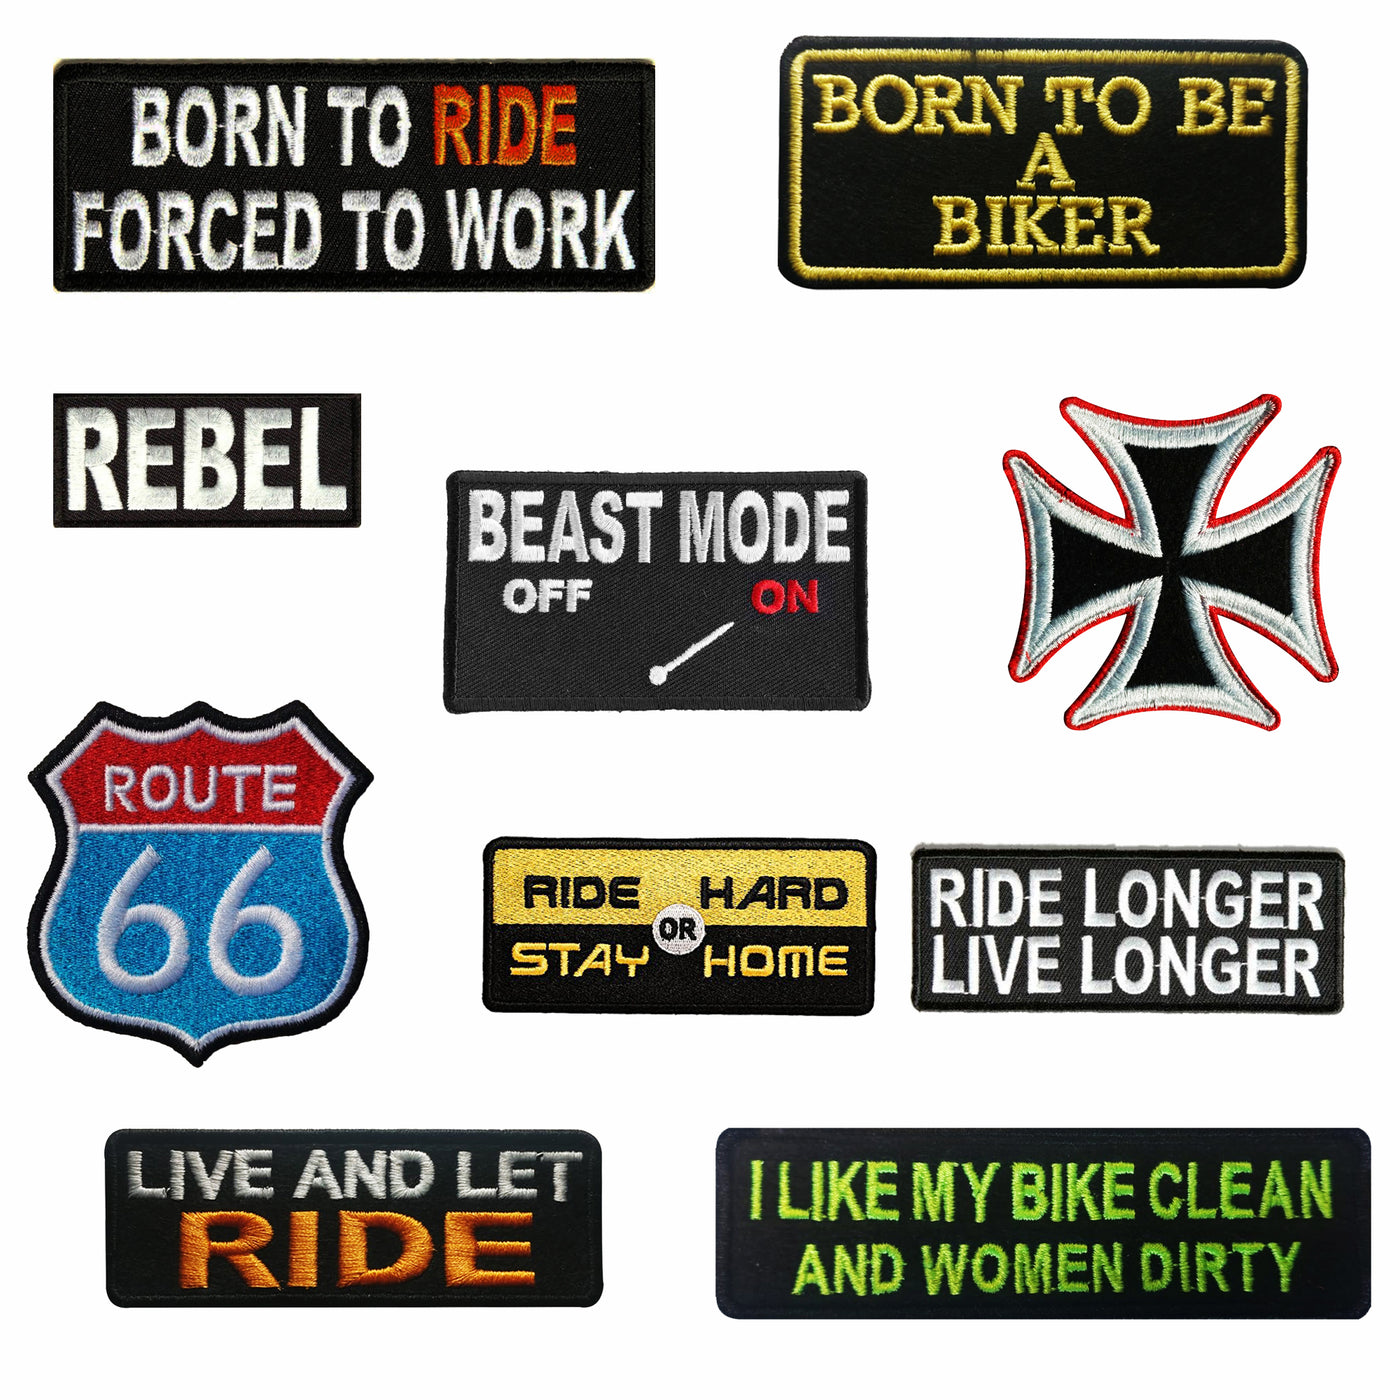 Best Biker patches in India online.T shirts for Men and women biker,motorcycle